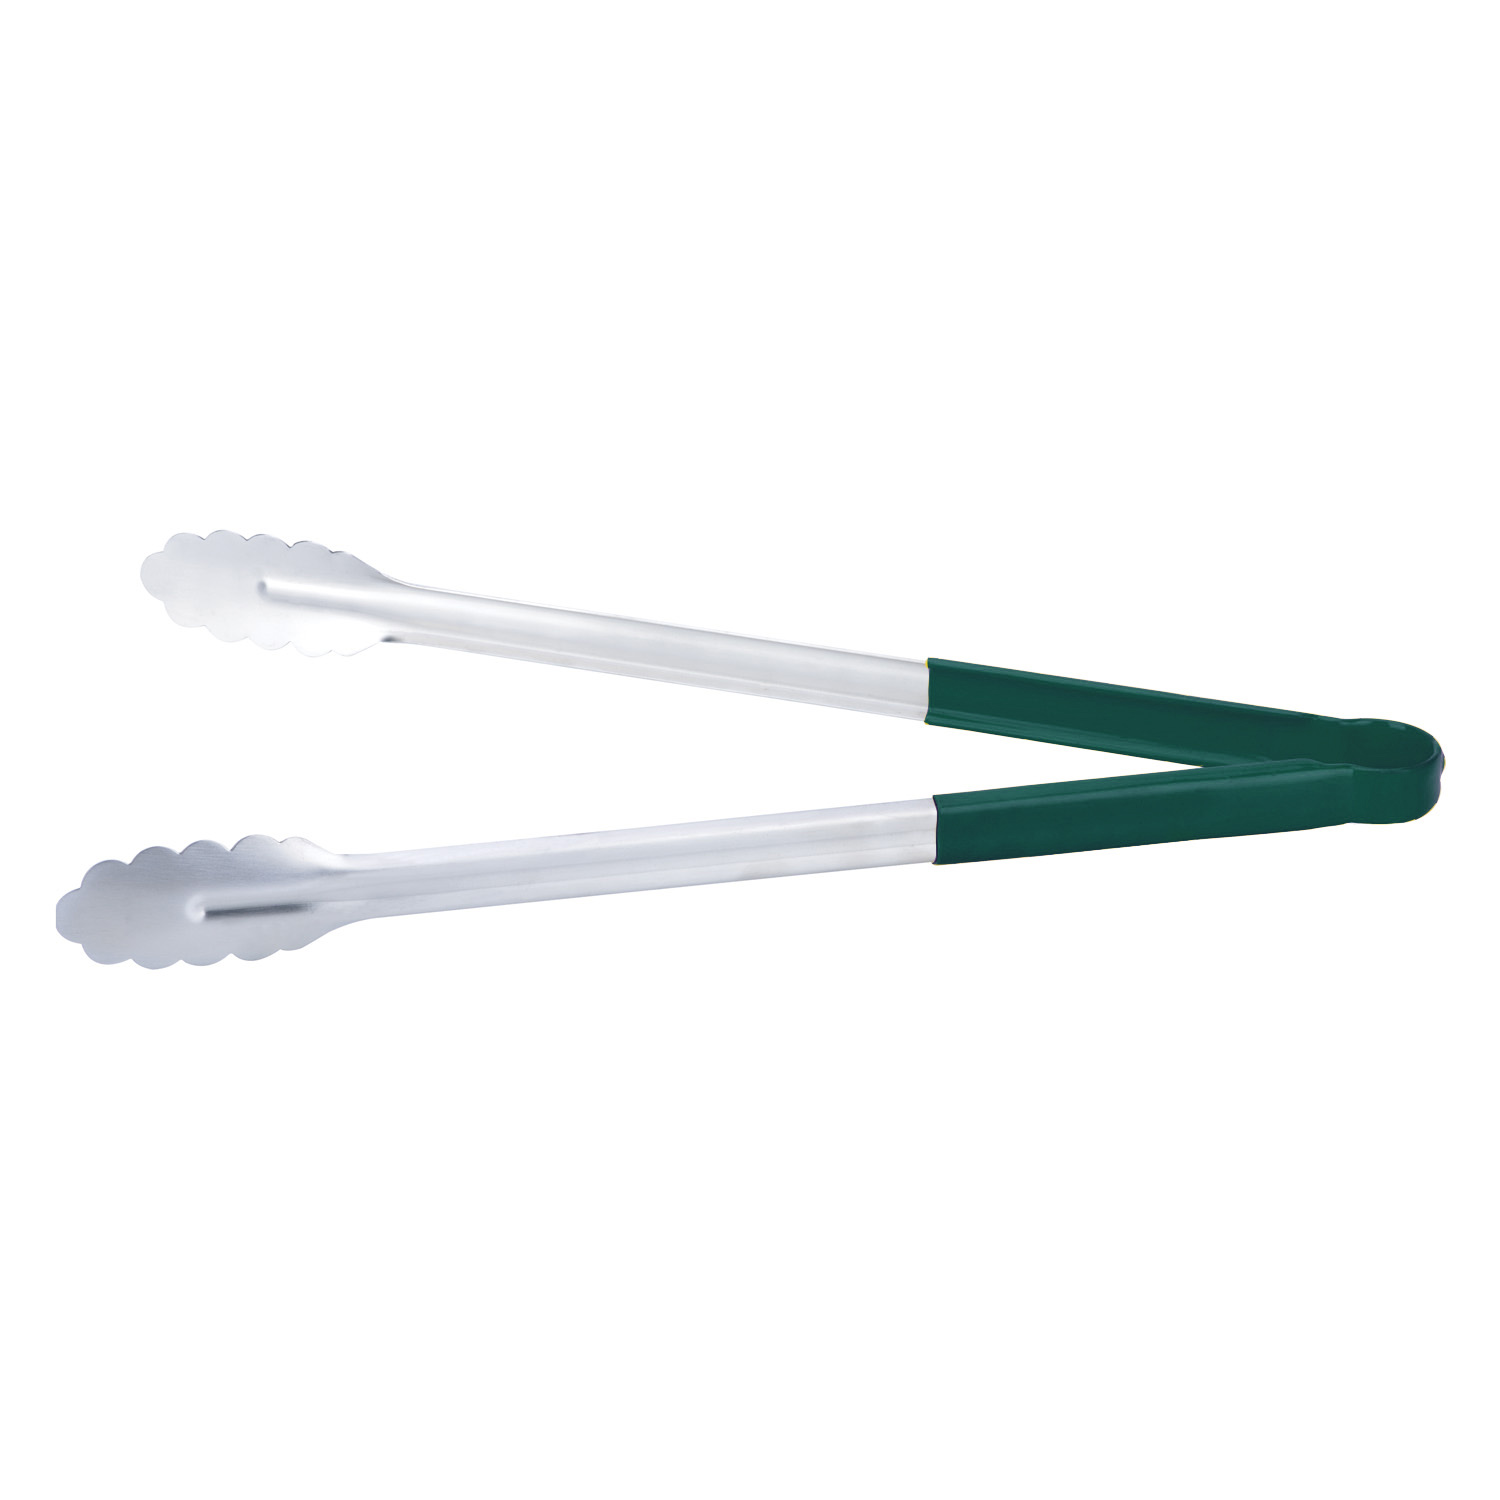 CAC China STCH-16GN Stainless Steel Tongs with Green Handle 16"